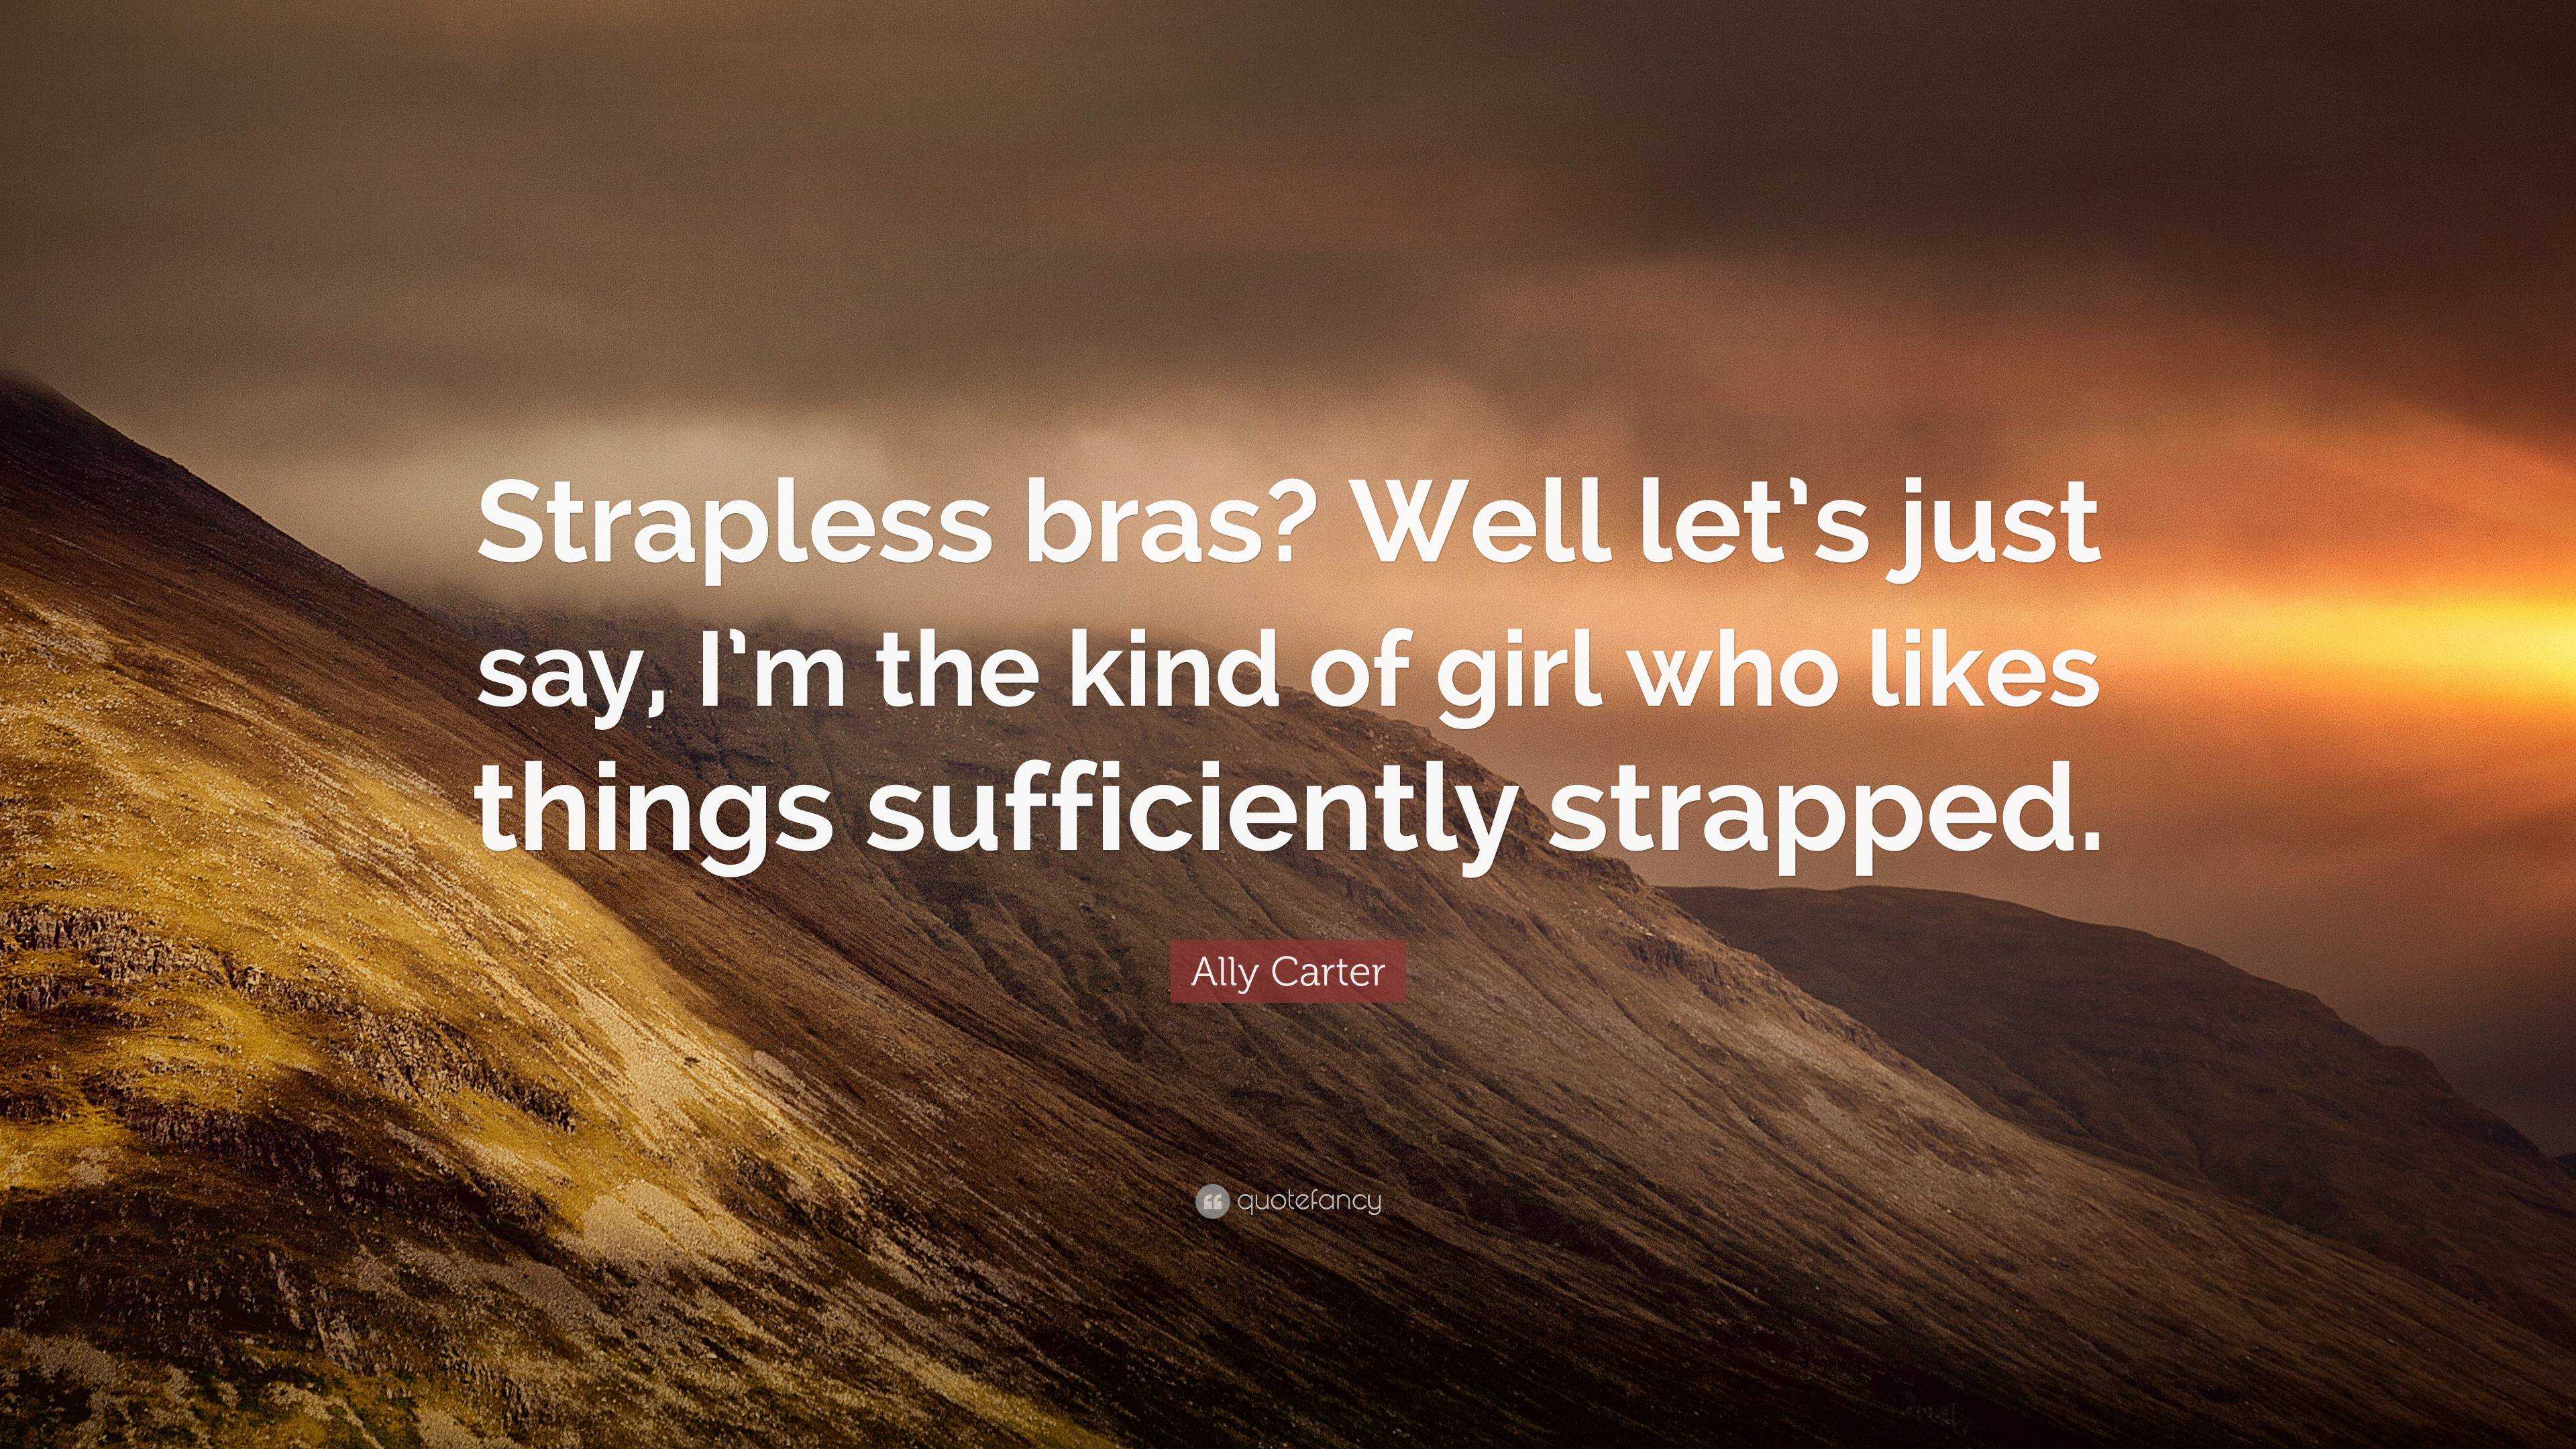 Ally Carter Quote: “Strapless bras? Well let's just say, I'm the